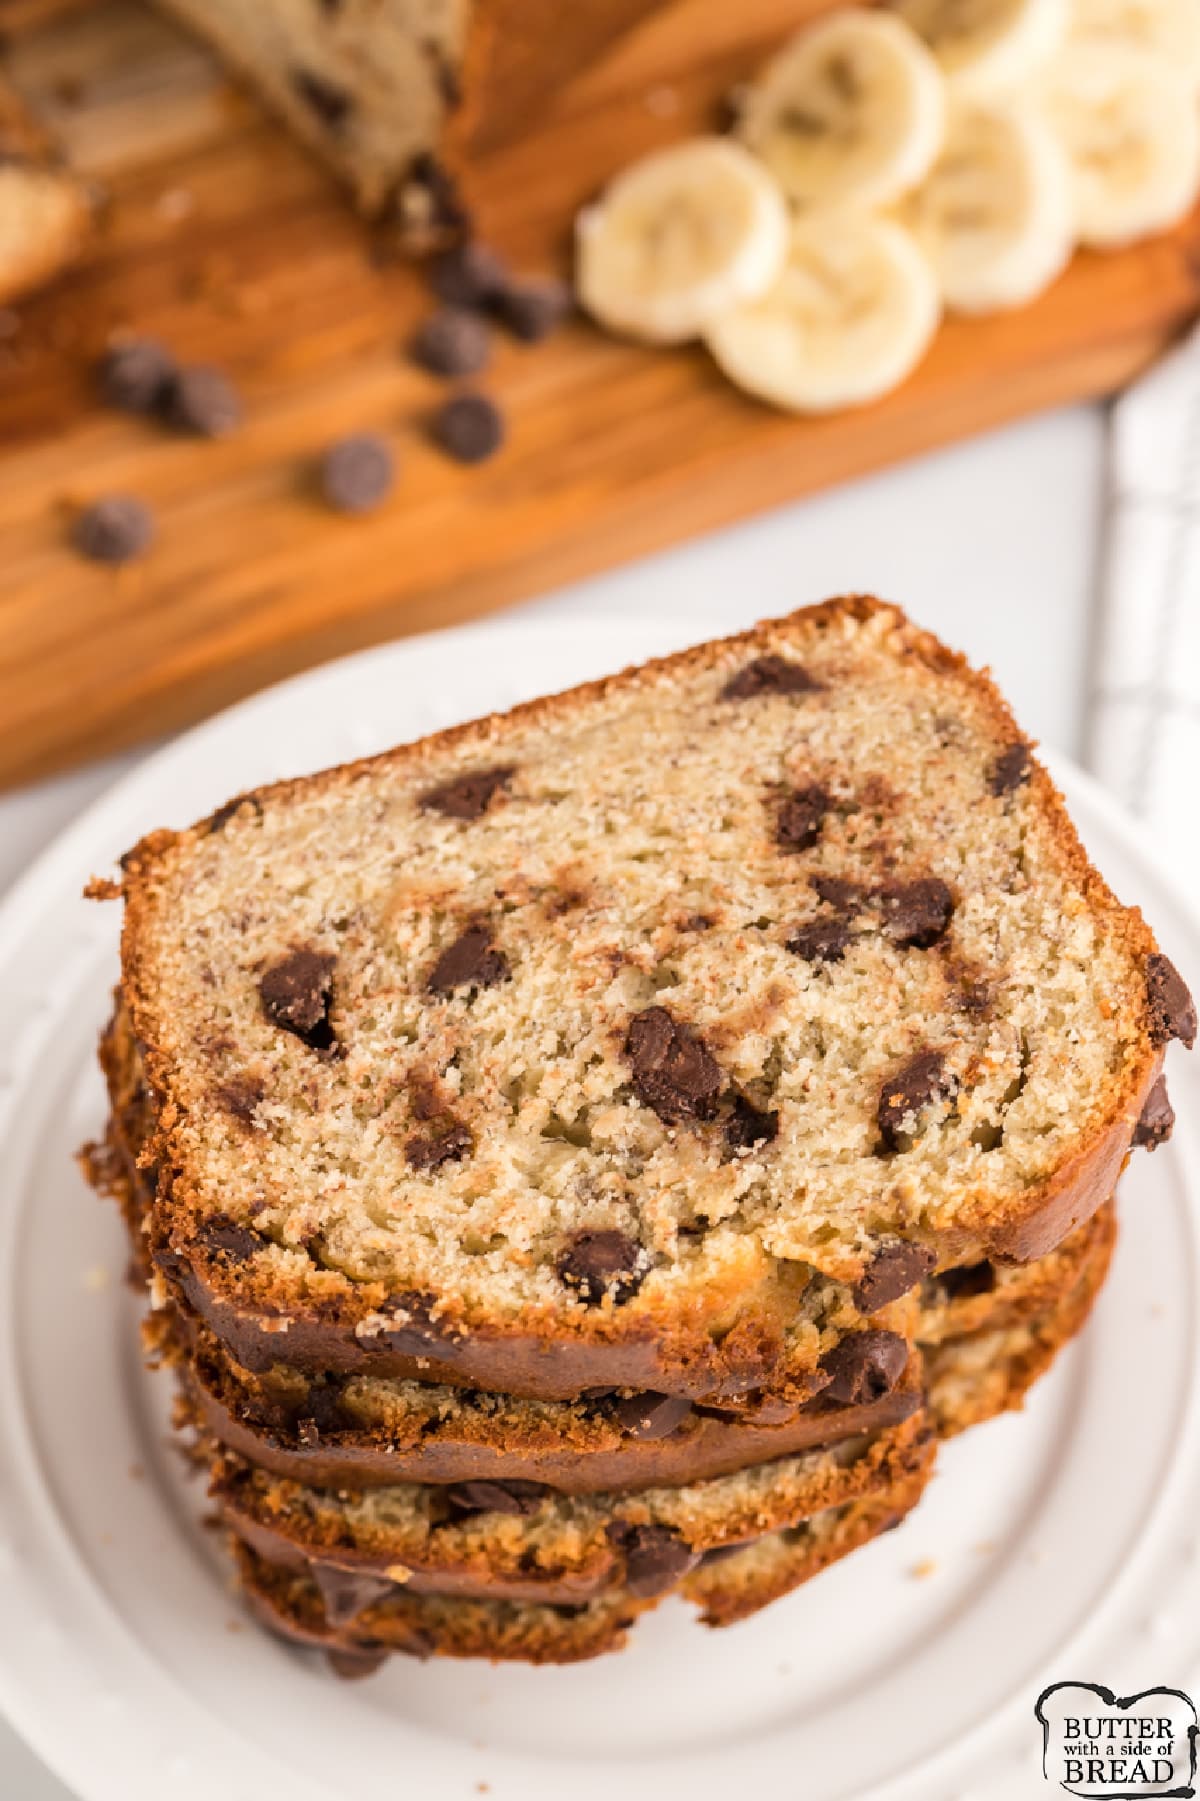 Chocolate Chip Banana Bread made with fresh bananas, chocolate chips and sour cream. Moist and delicious banana bread recipe.